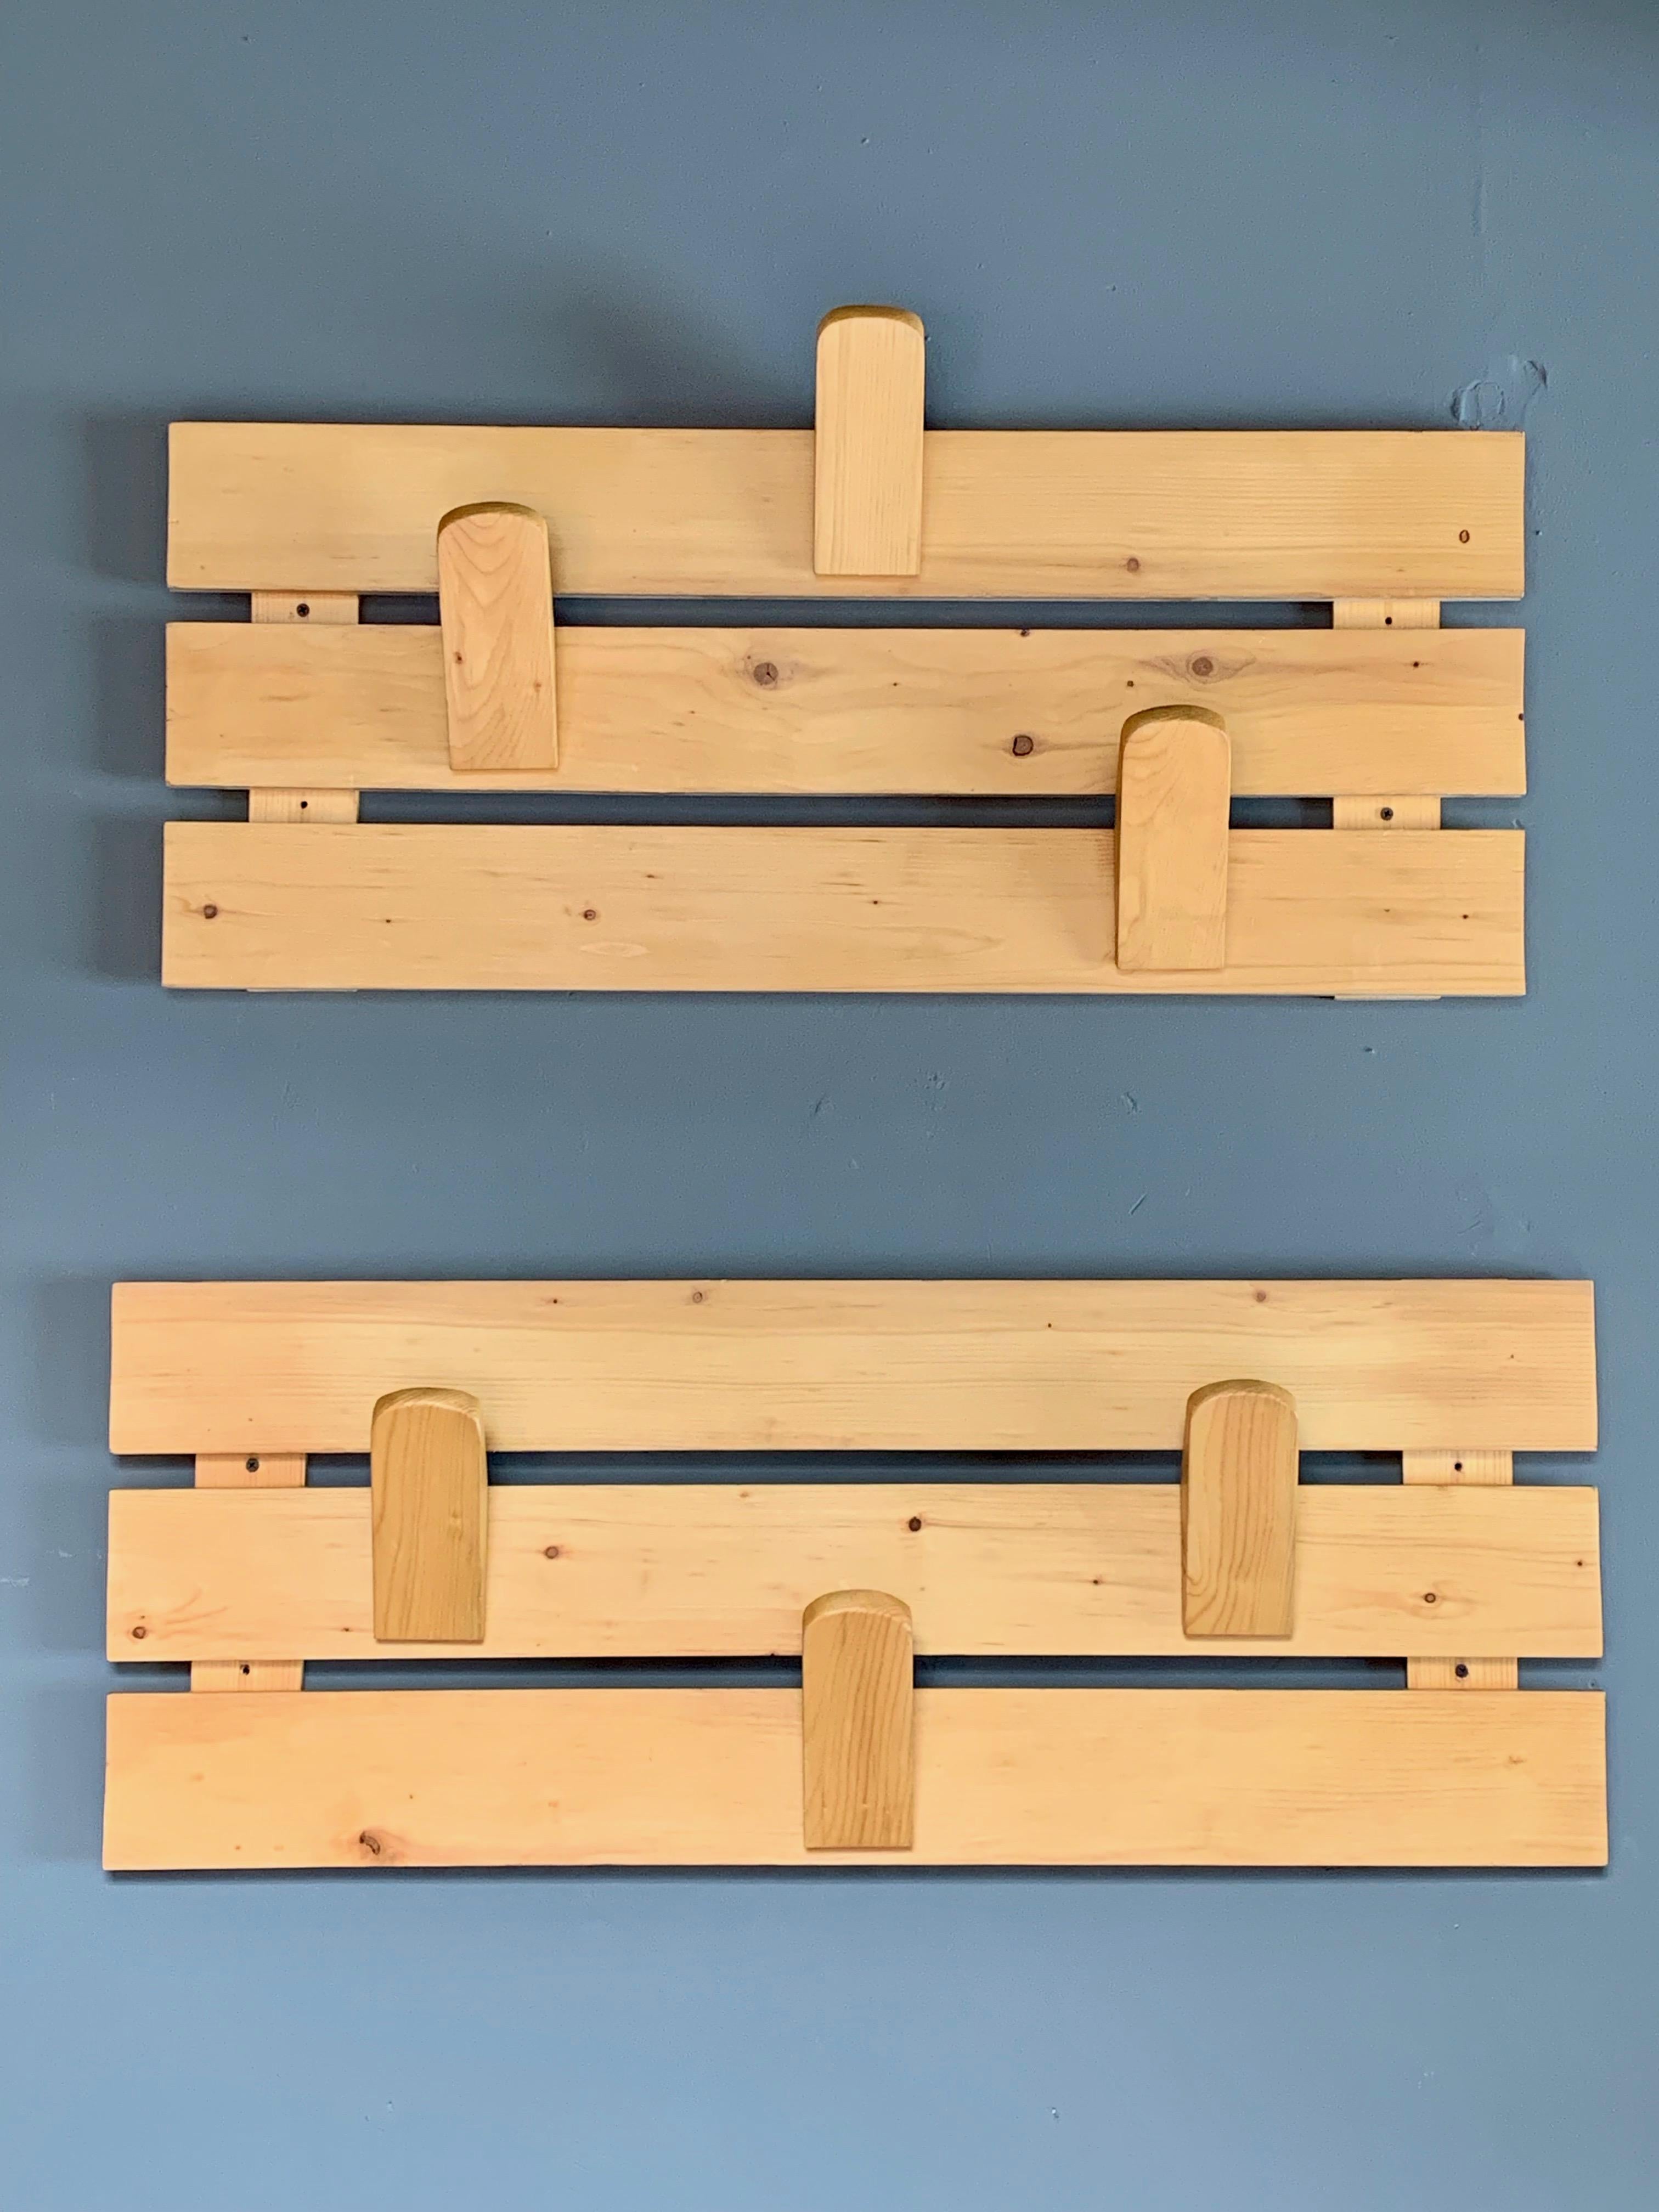 Super rare pine coat rack by Charlotte Perriand for Les Arcs. Taken out of a complete Les Arcs apartment in France. Pine frame with three movable, pine tongue hooks. Hooks can be placed anywhere on the coat rack. Great vintage condition.

Slightly